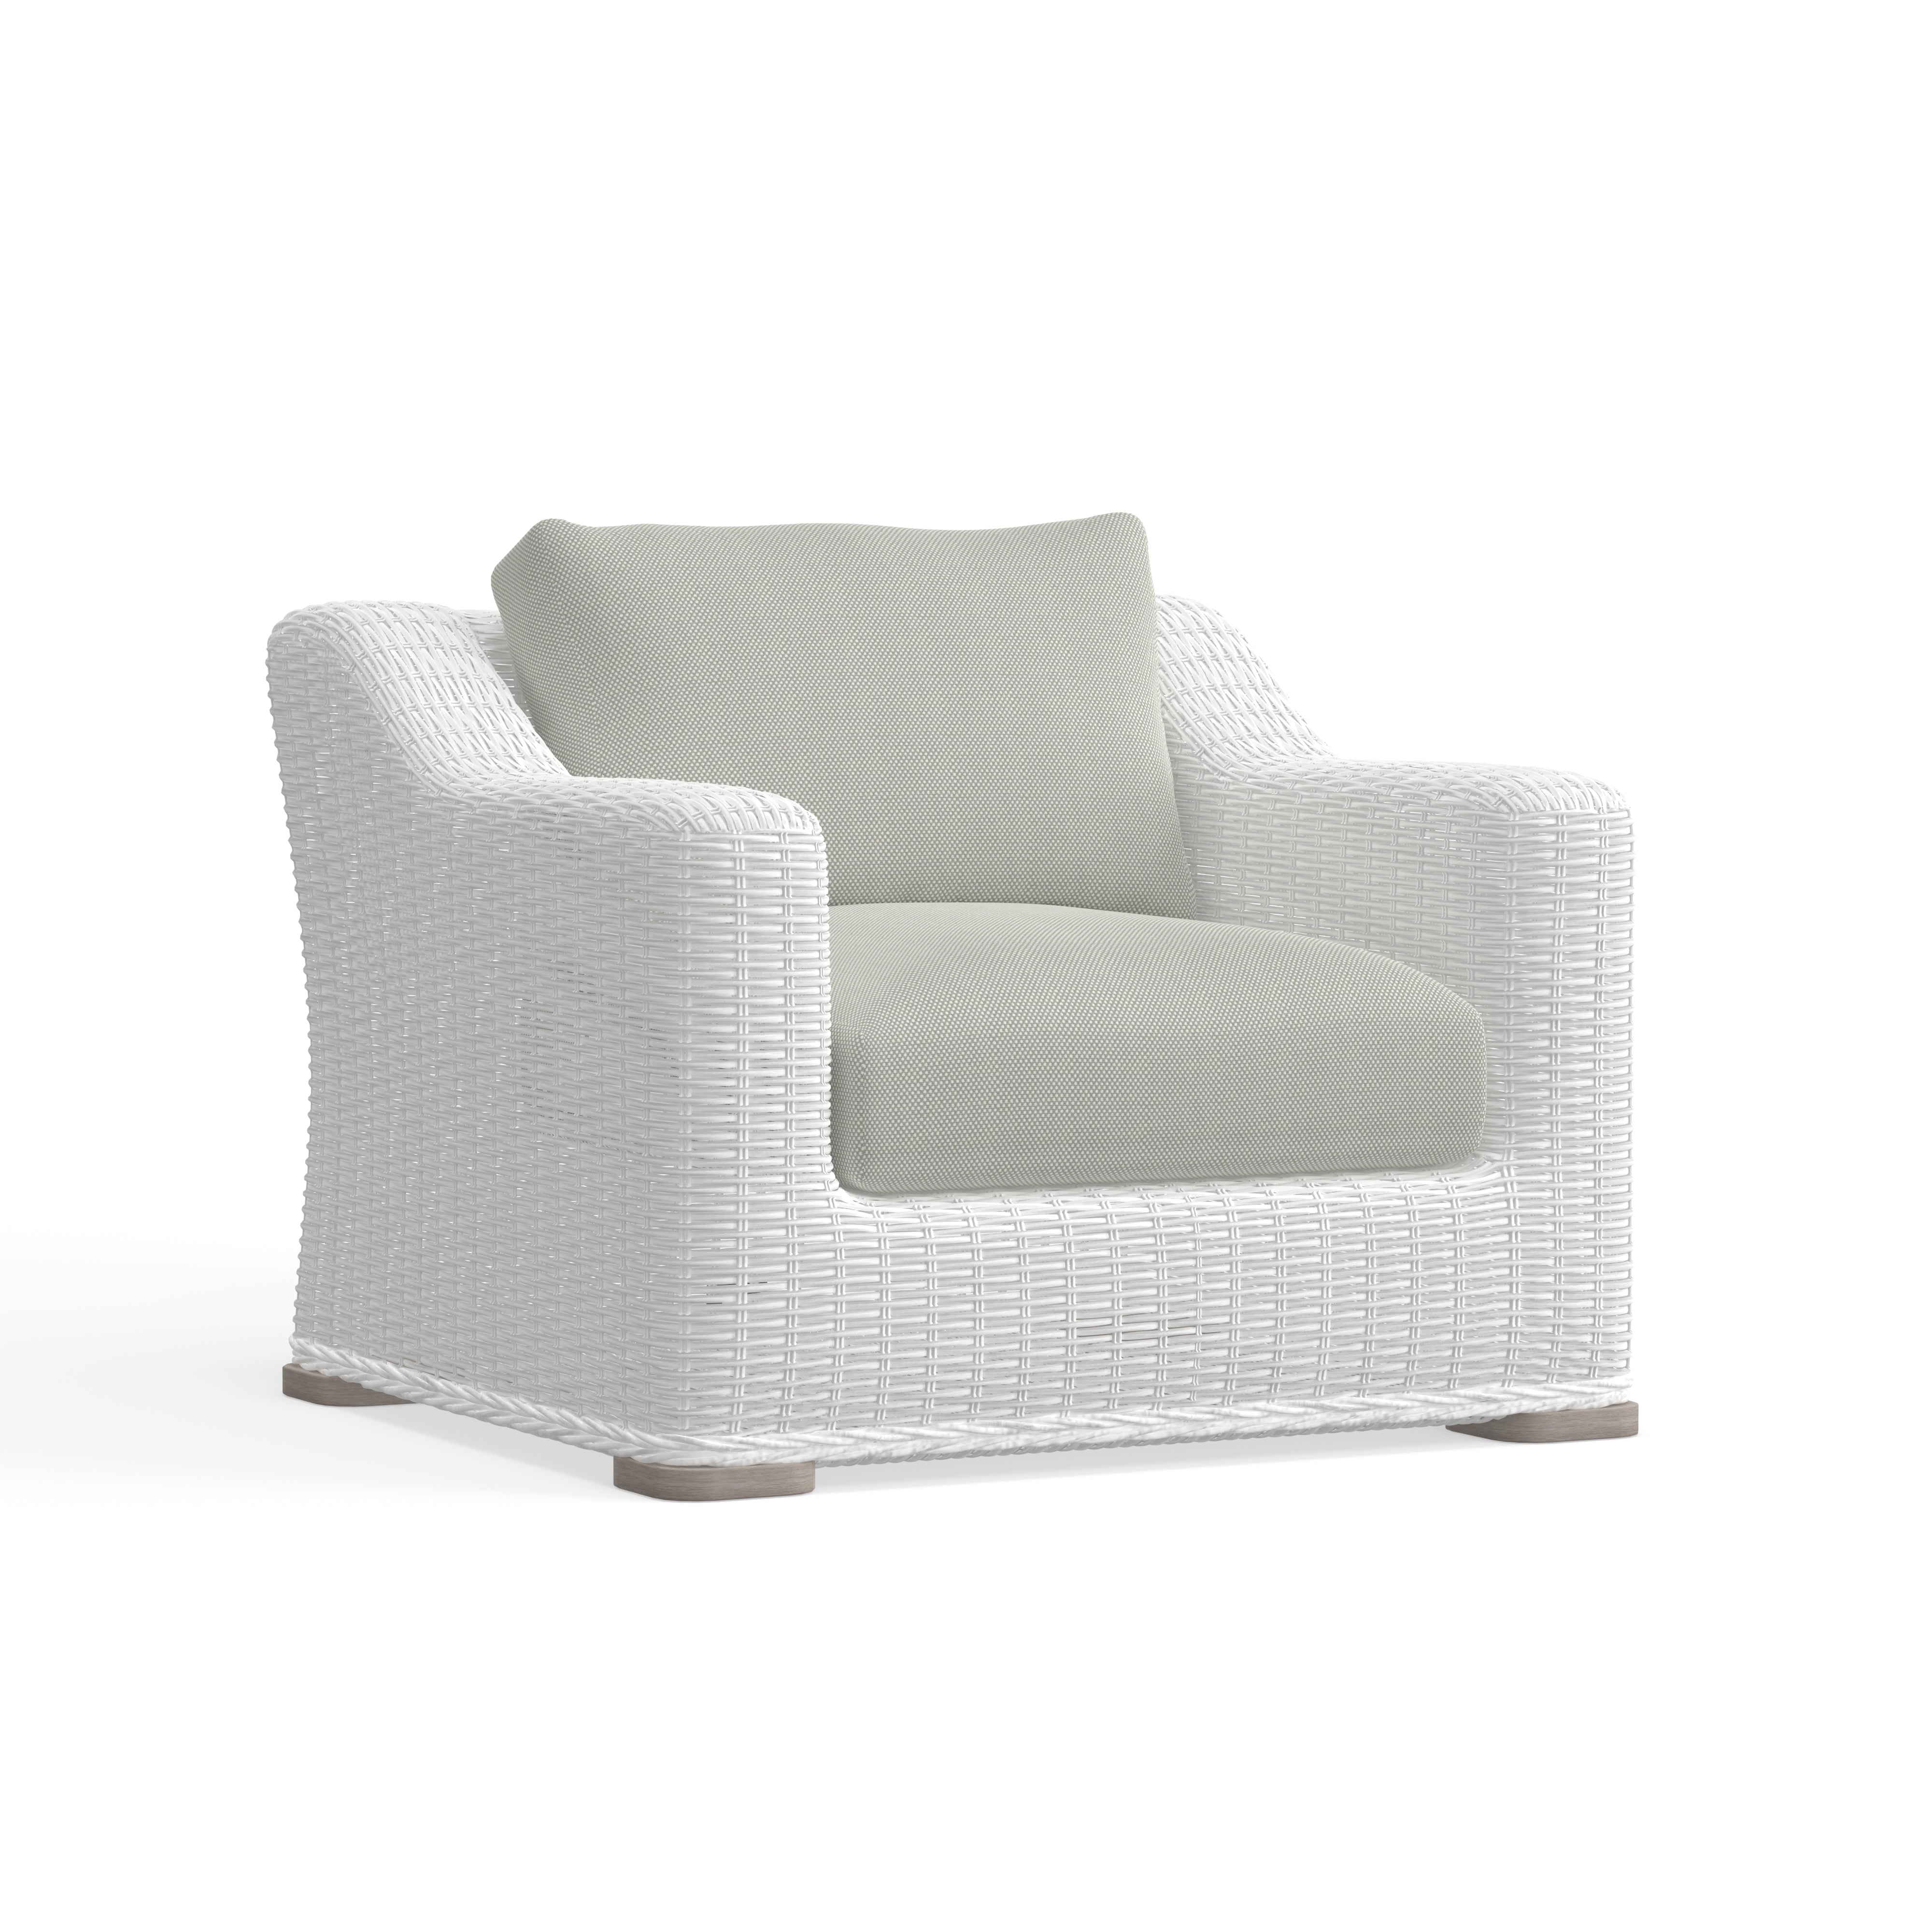 Modern And Comfortable Outdoor Wicker Set In White And Brown